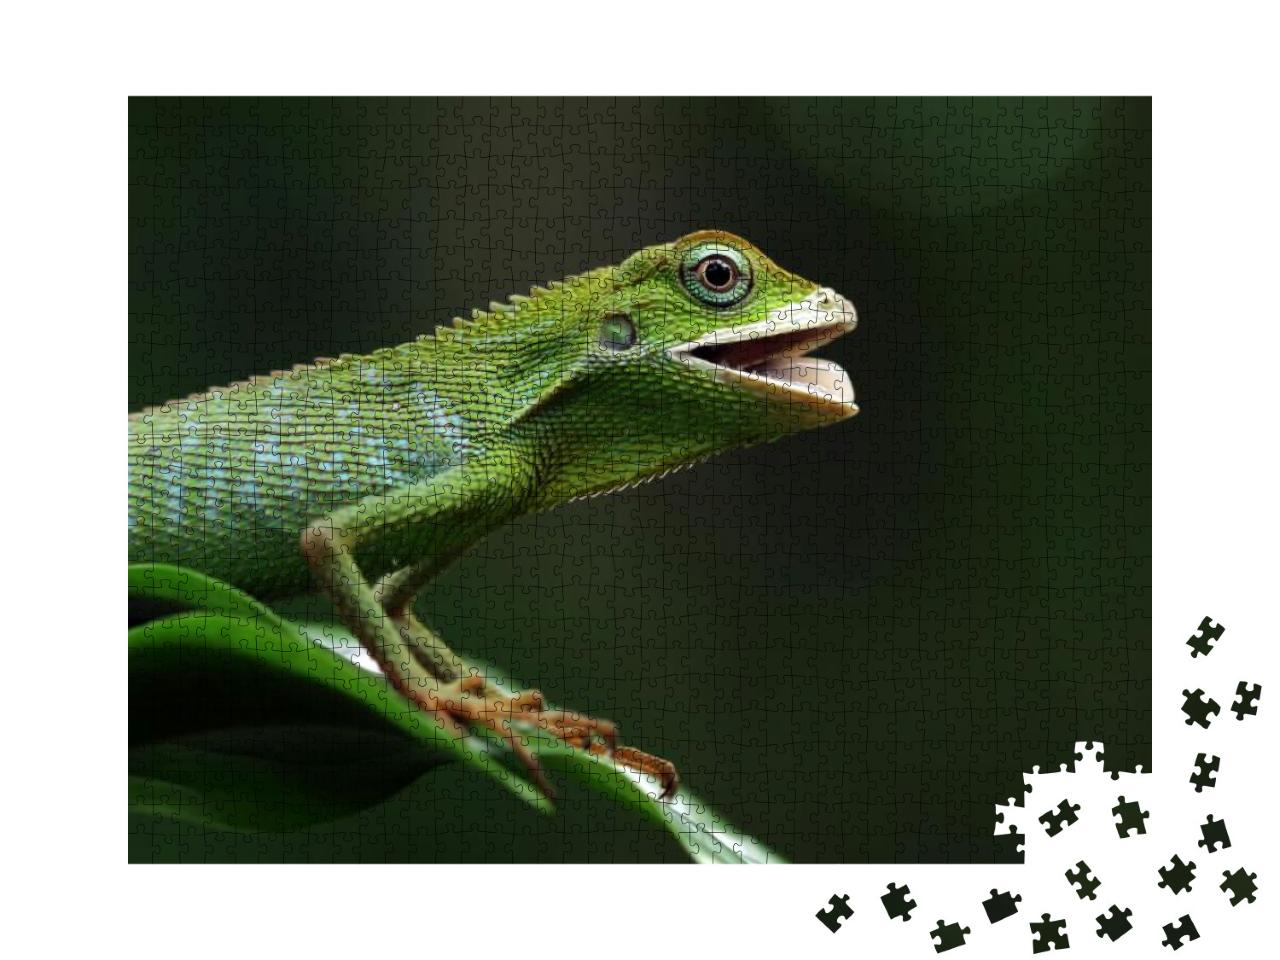 Green Lizard on Branch, Green Lizard Sunbathing on Branch... Jigsaw Puzzle with 1000 pieces